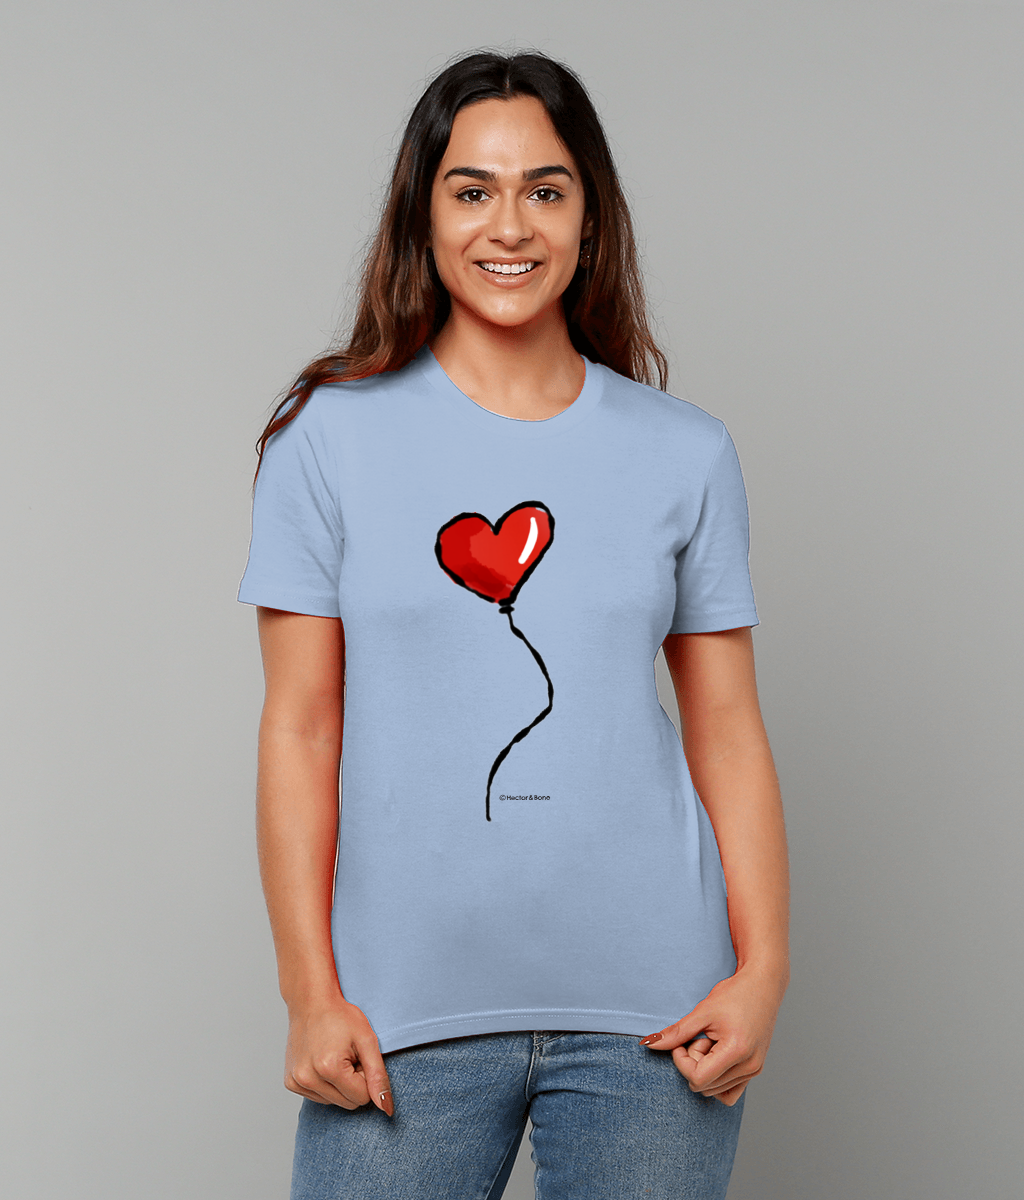 Woman wearing a Red Heart Balloon I Love you T-shirt design printed on a vegan cotton t-shirt by Hector and Bone